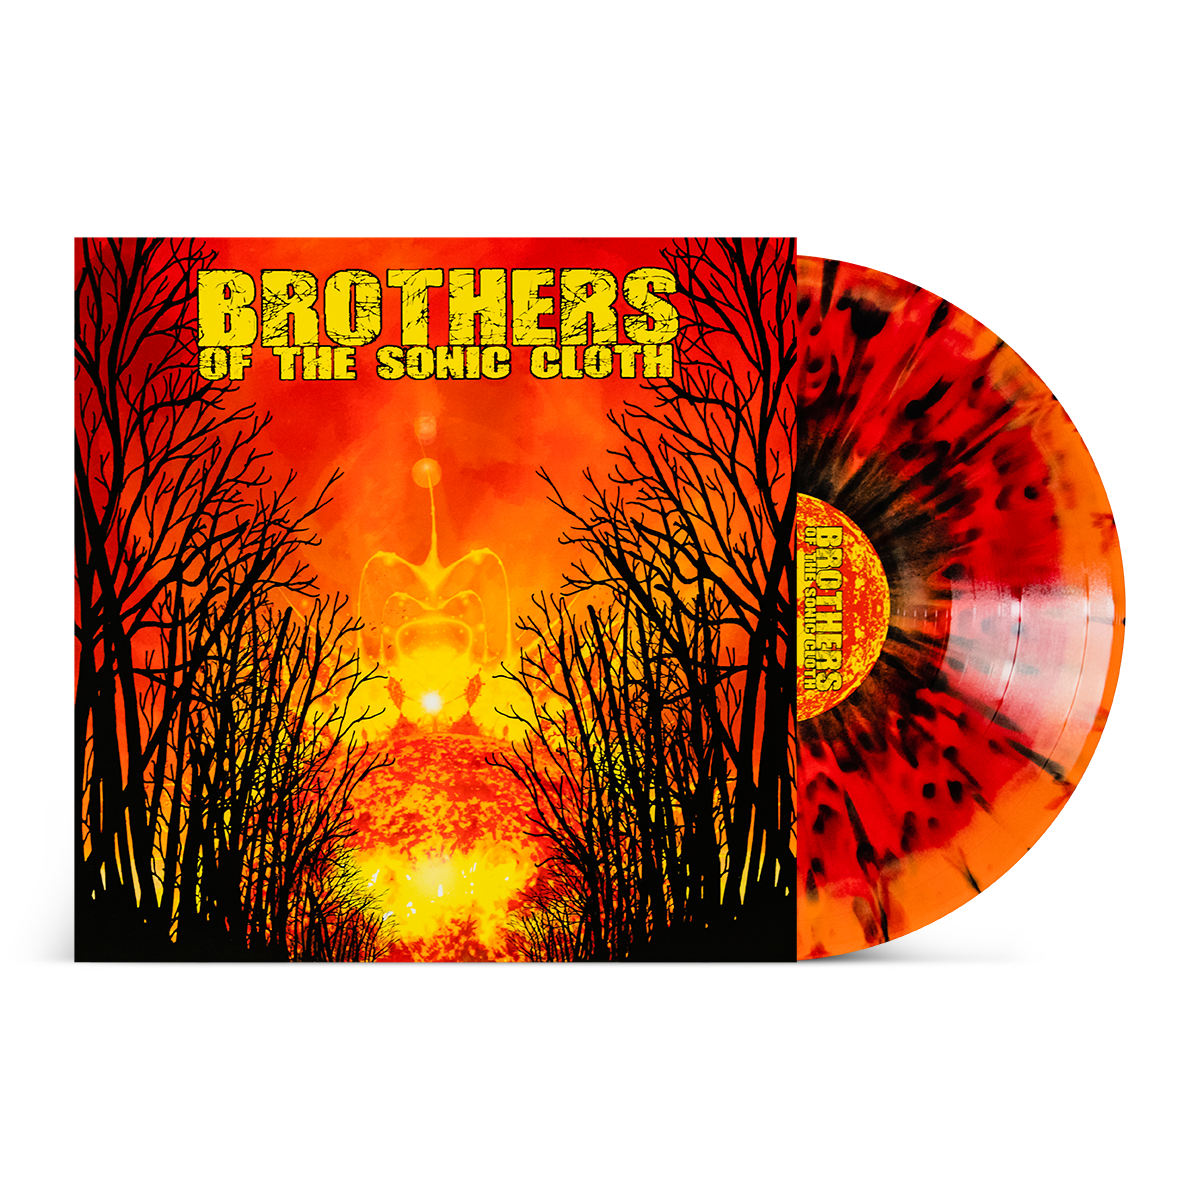 BROTHERS OF THE SONIC CLOTH "Self-Titled"